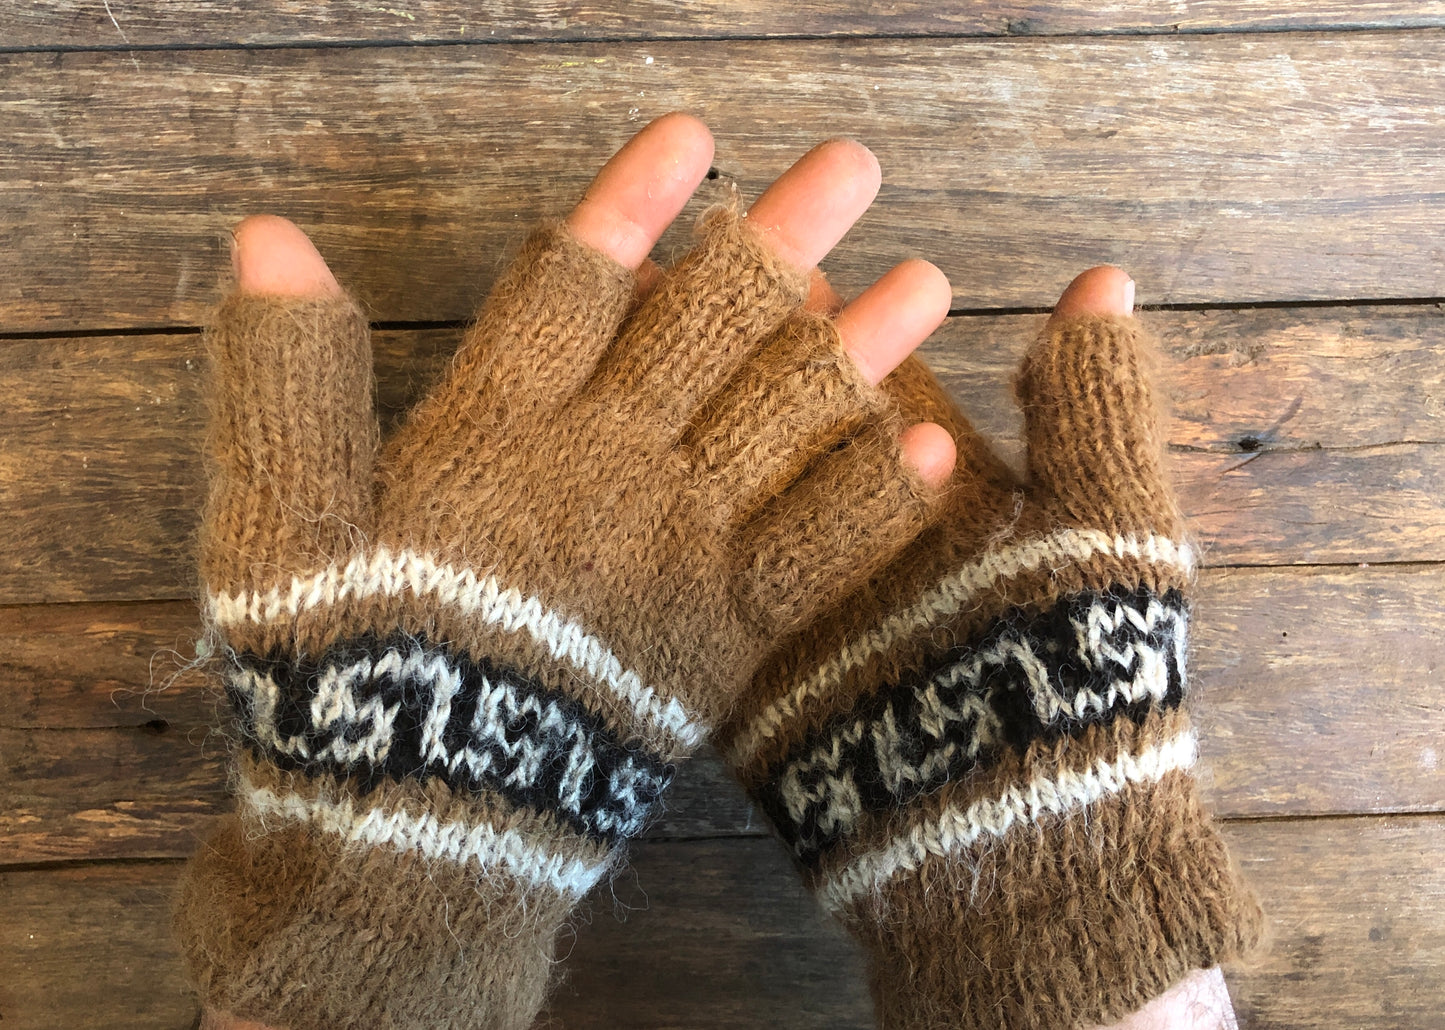 Speckled brown and white- Bolivian Double Alpaca Fingerless Gloves